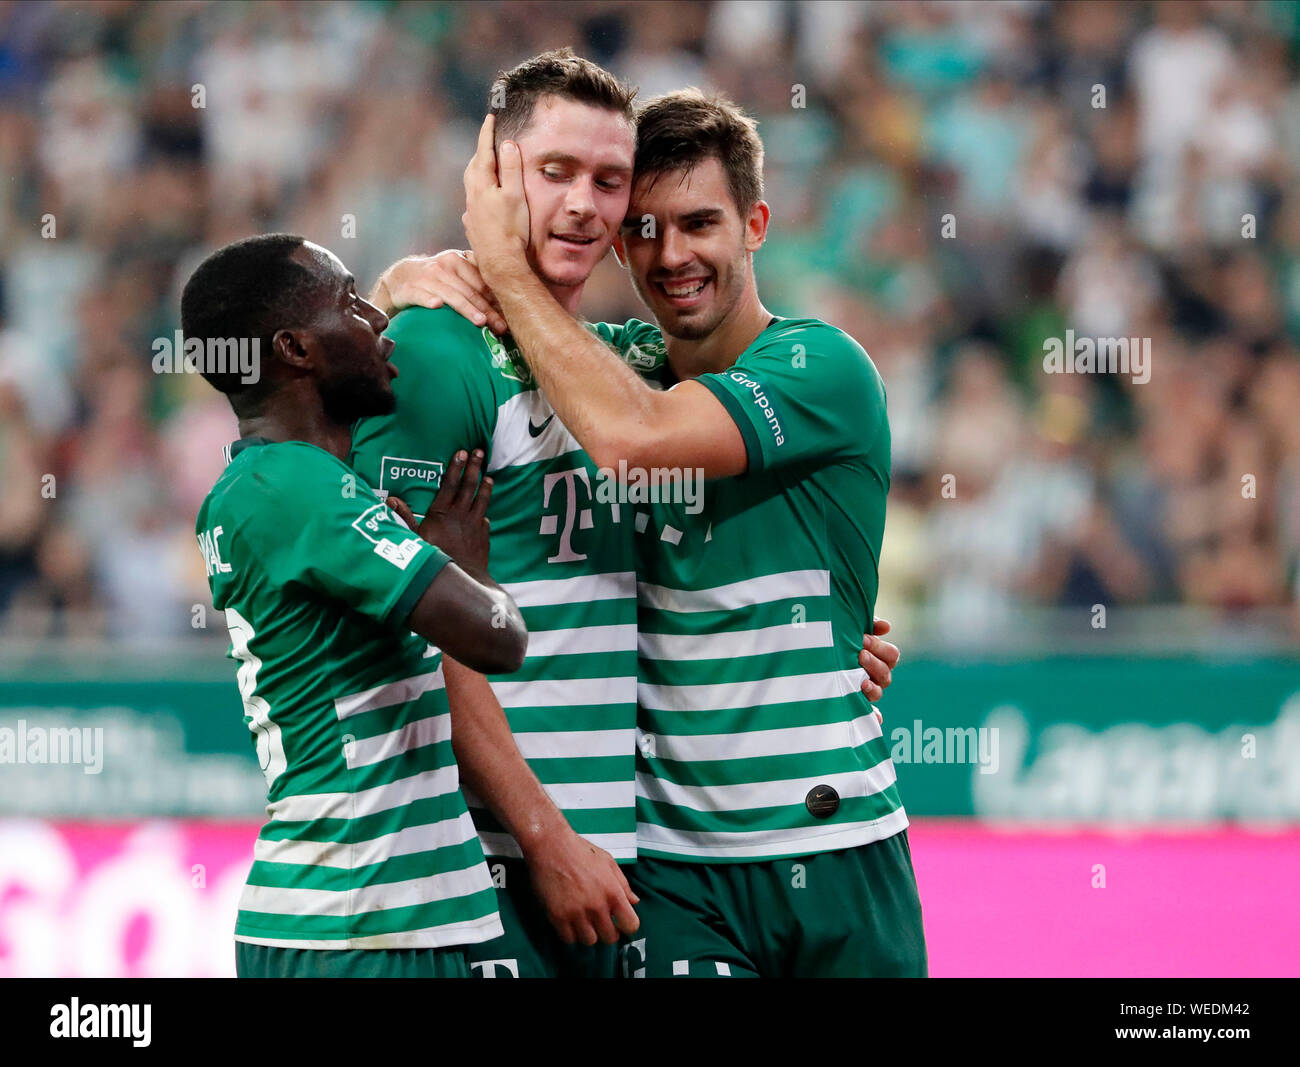 BUDAPEST, HUNGARY - JULY 24: Davide Lanzafame of Ferencvarosi TC celebrates  his goal during the UEFA Champions League Qualifying Round match between Ferencvarosi  TC and Valletta FC at Ferencvaros Stadium on July